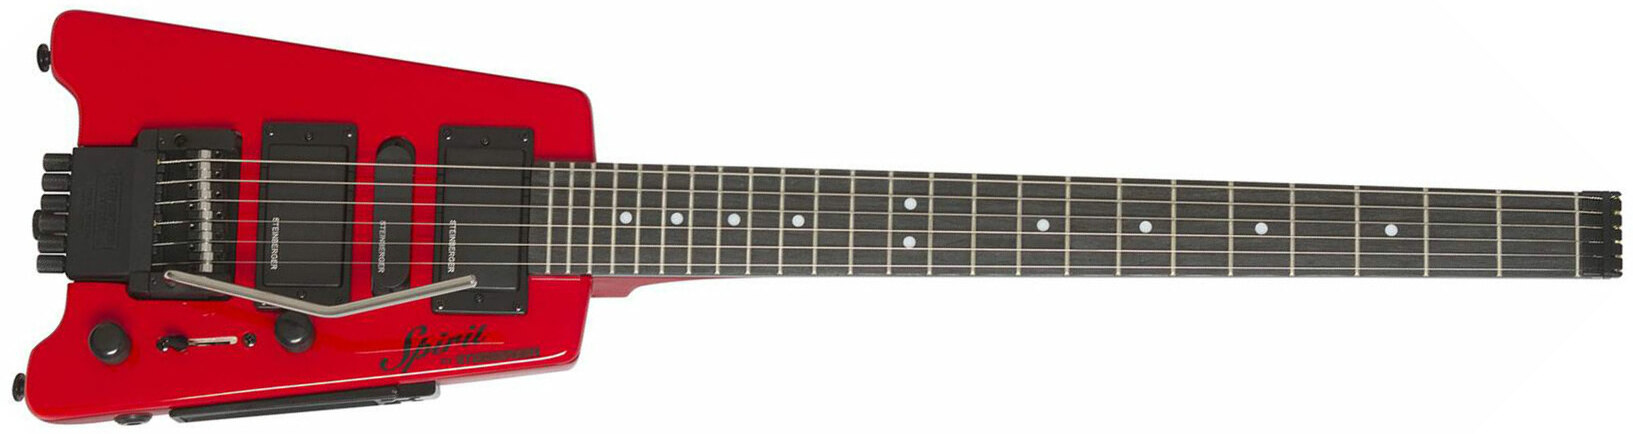 Steinberger Gt-pro Deluxe Outfit Hsh Trem Rw +housse - Hot Rod Red - Travel & mini electric guitar - Main picture